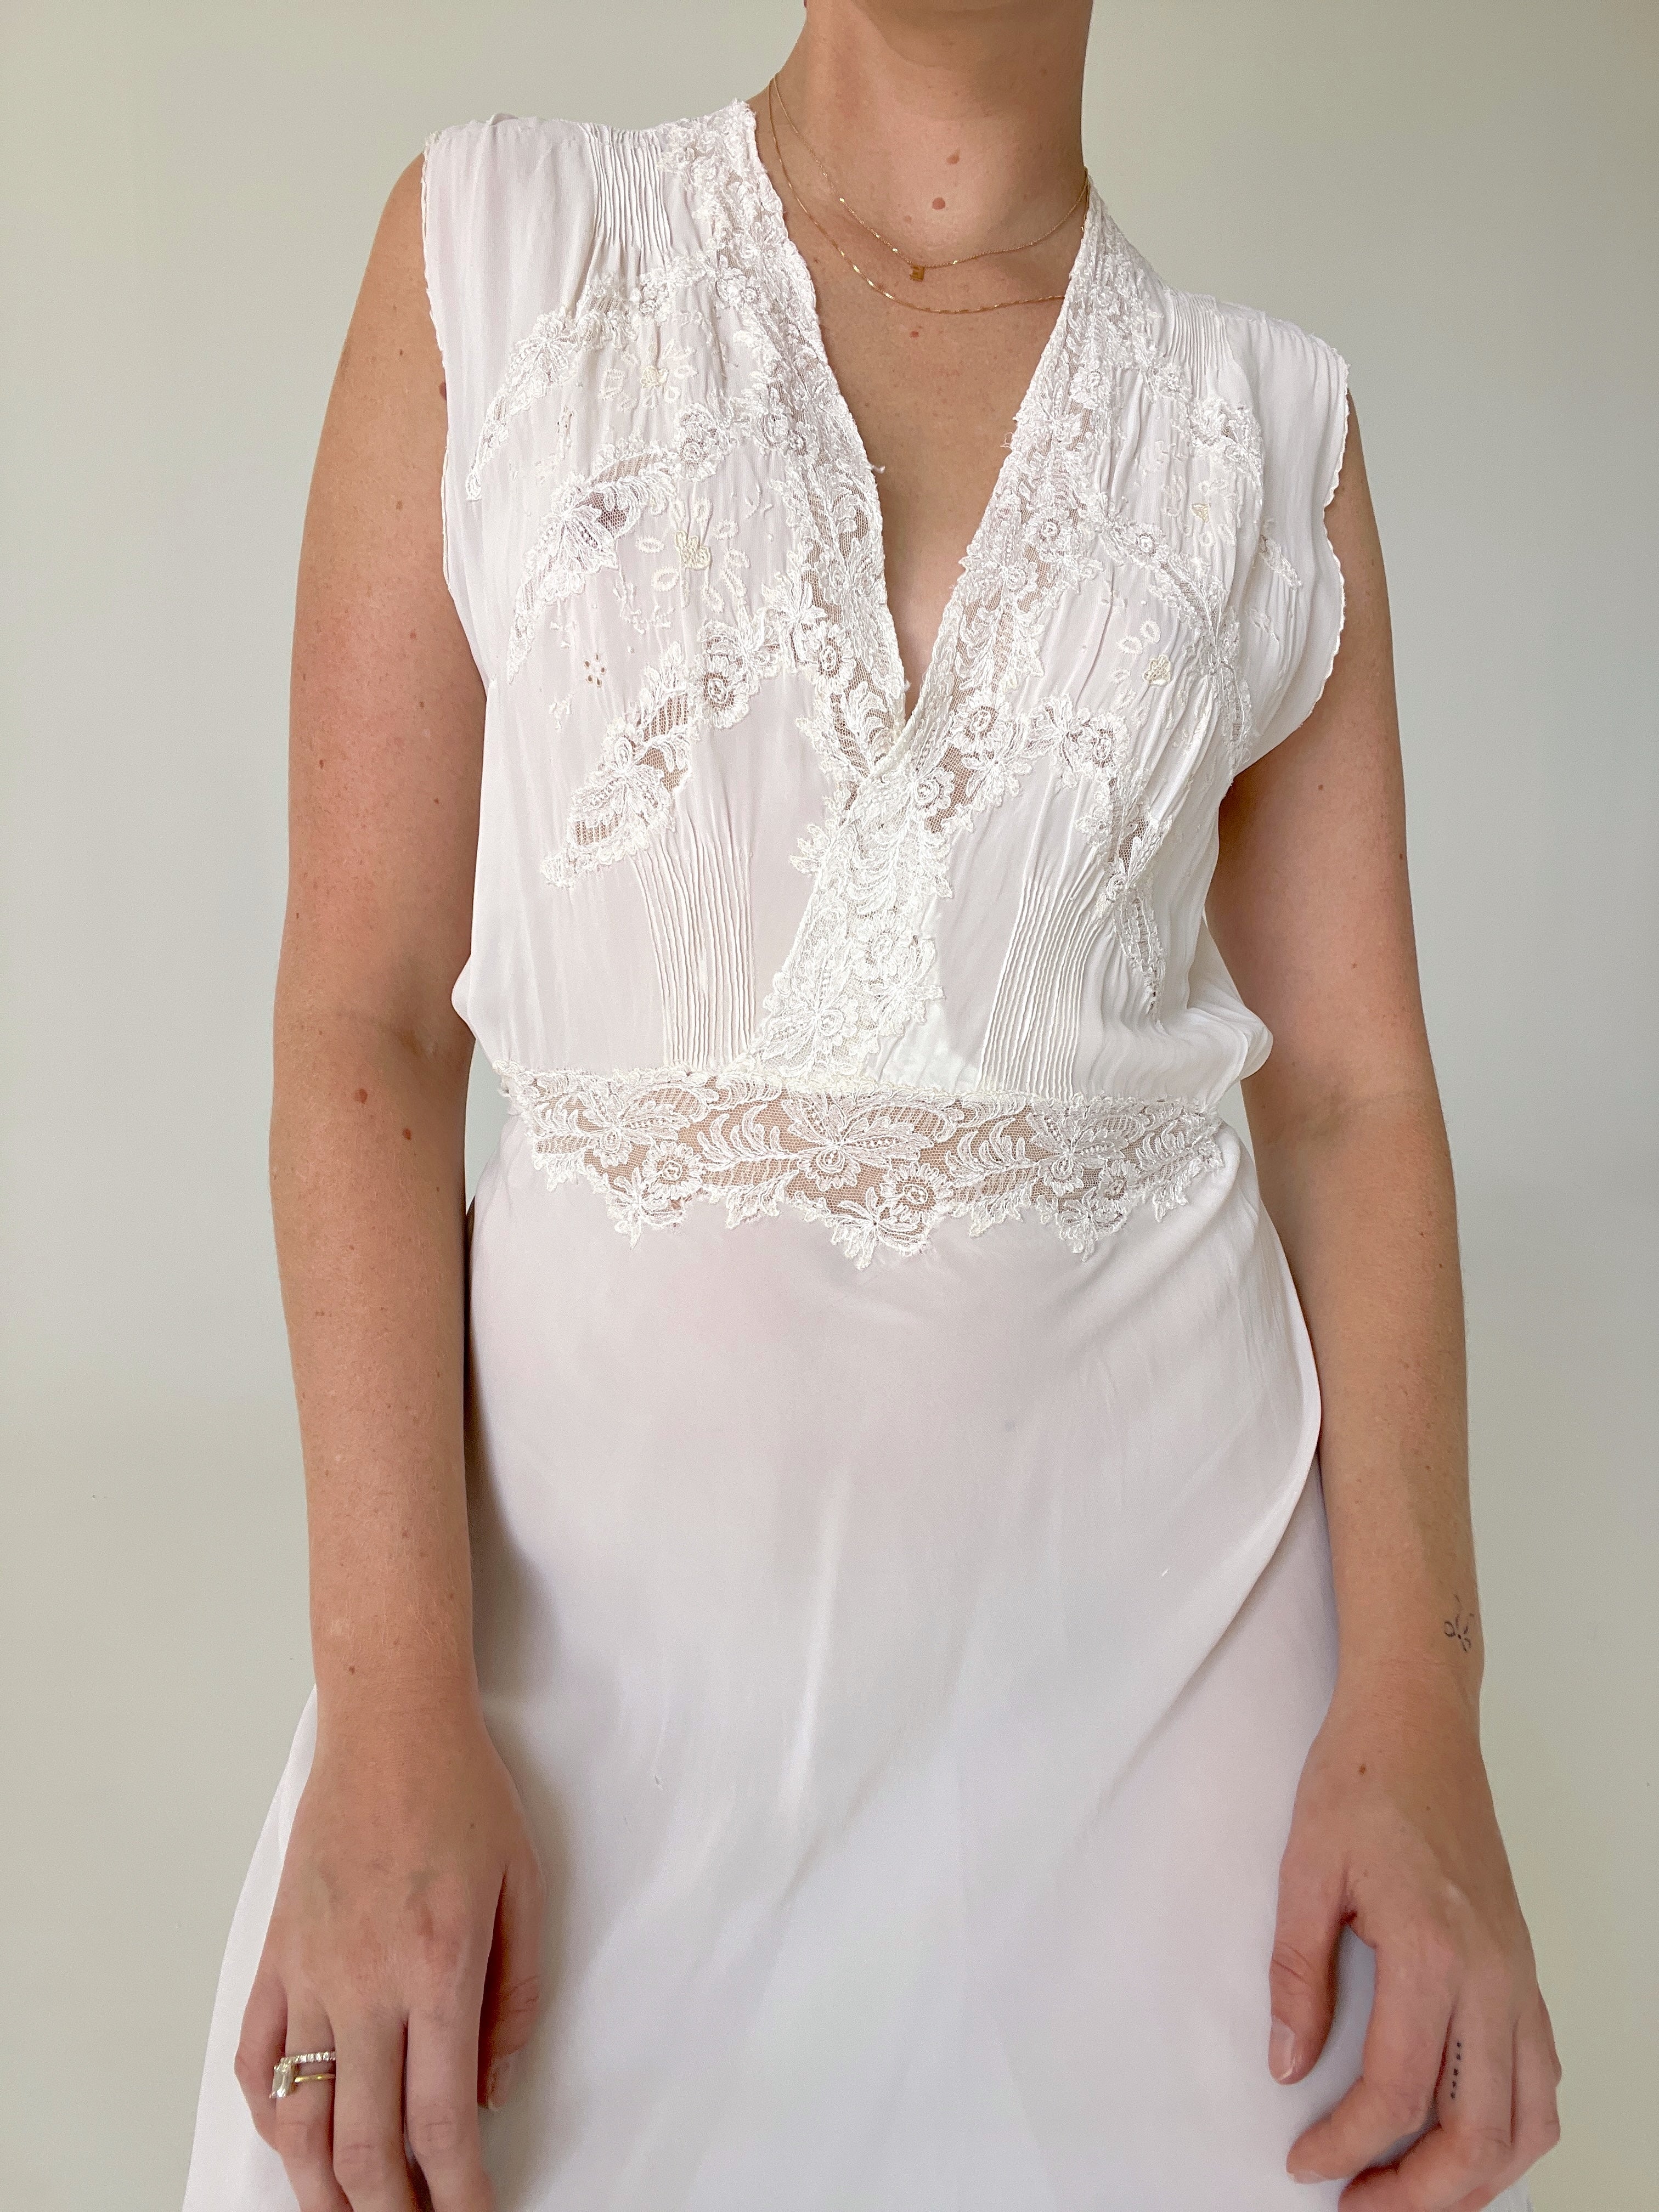 1930's Bridal White Silk Slip Dress with Lace